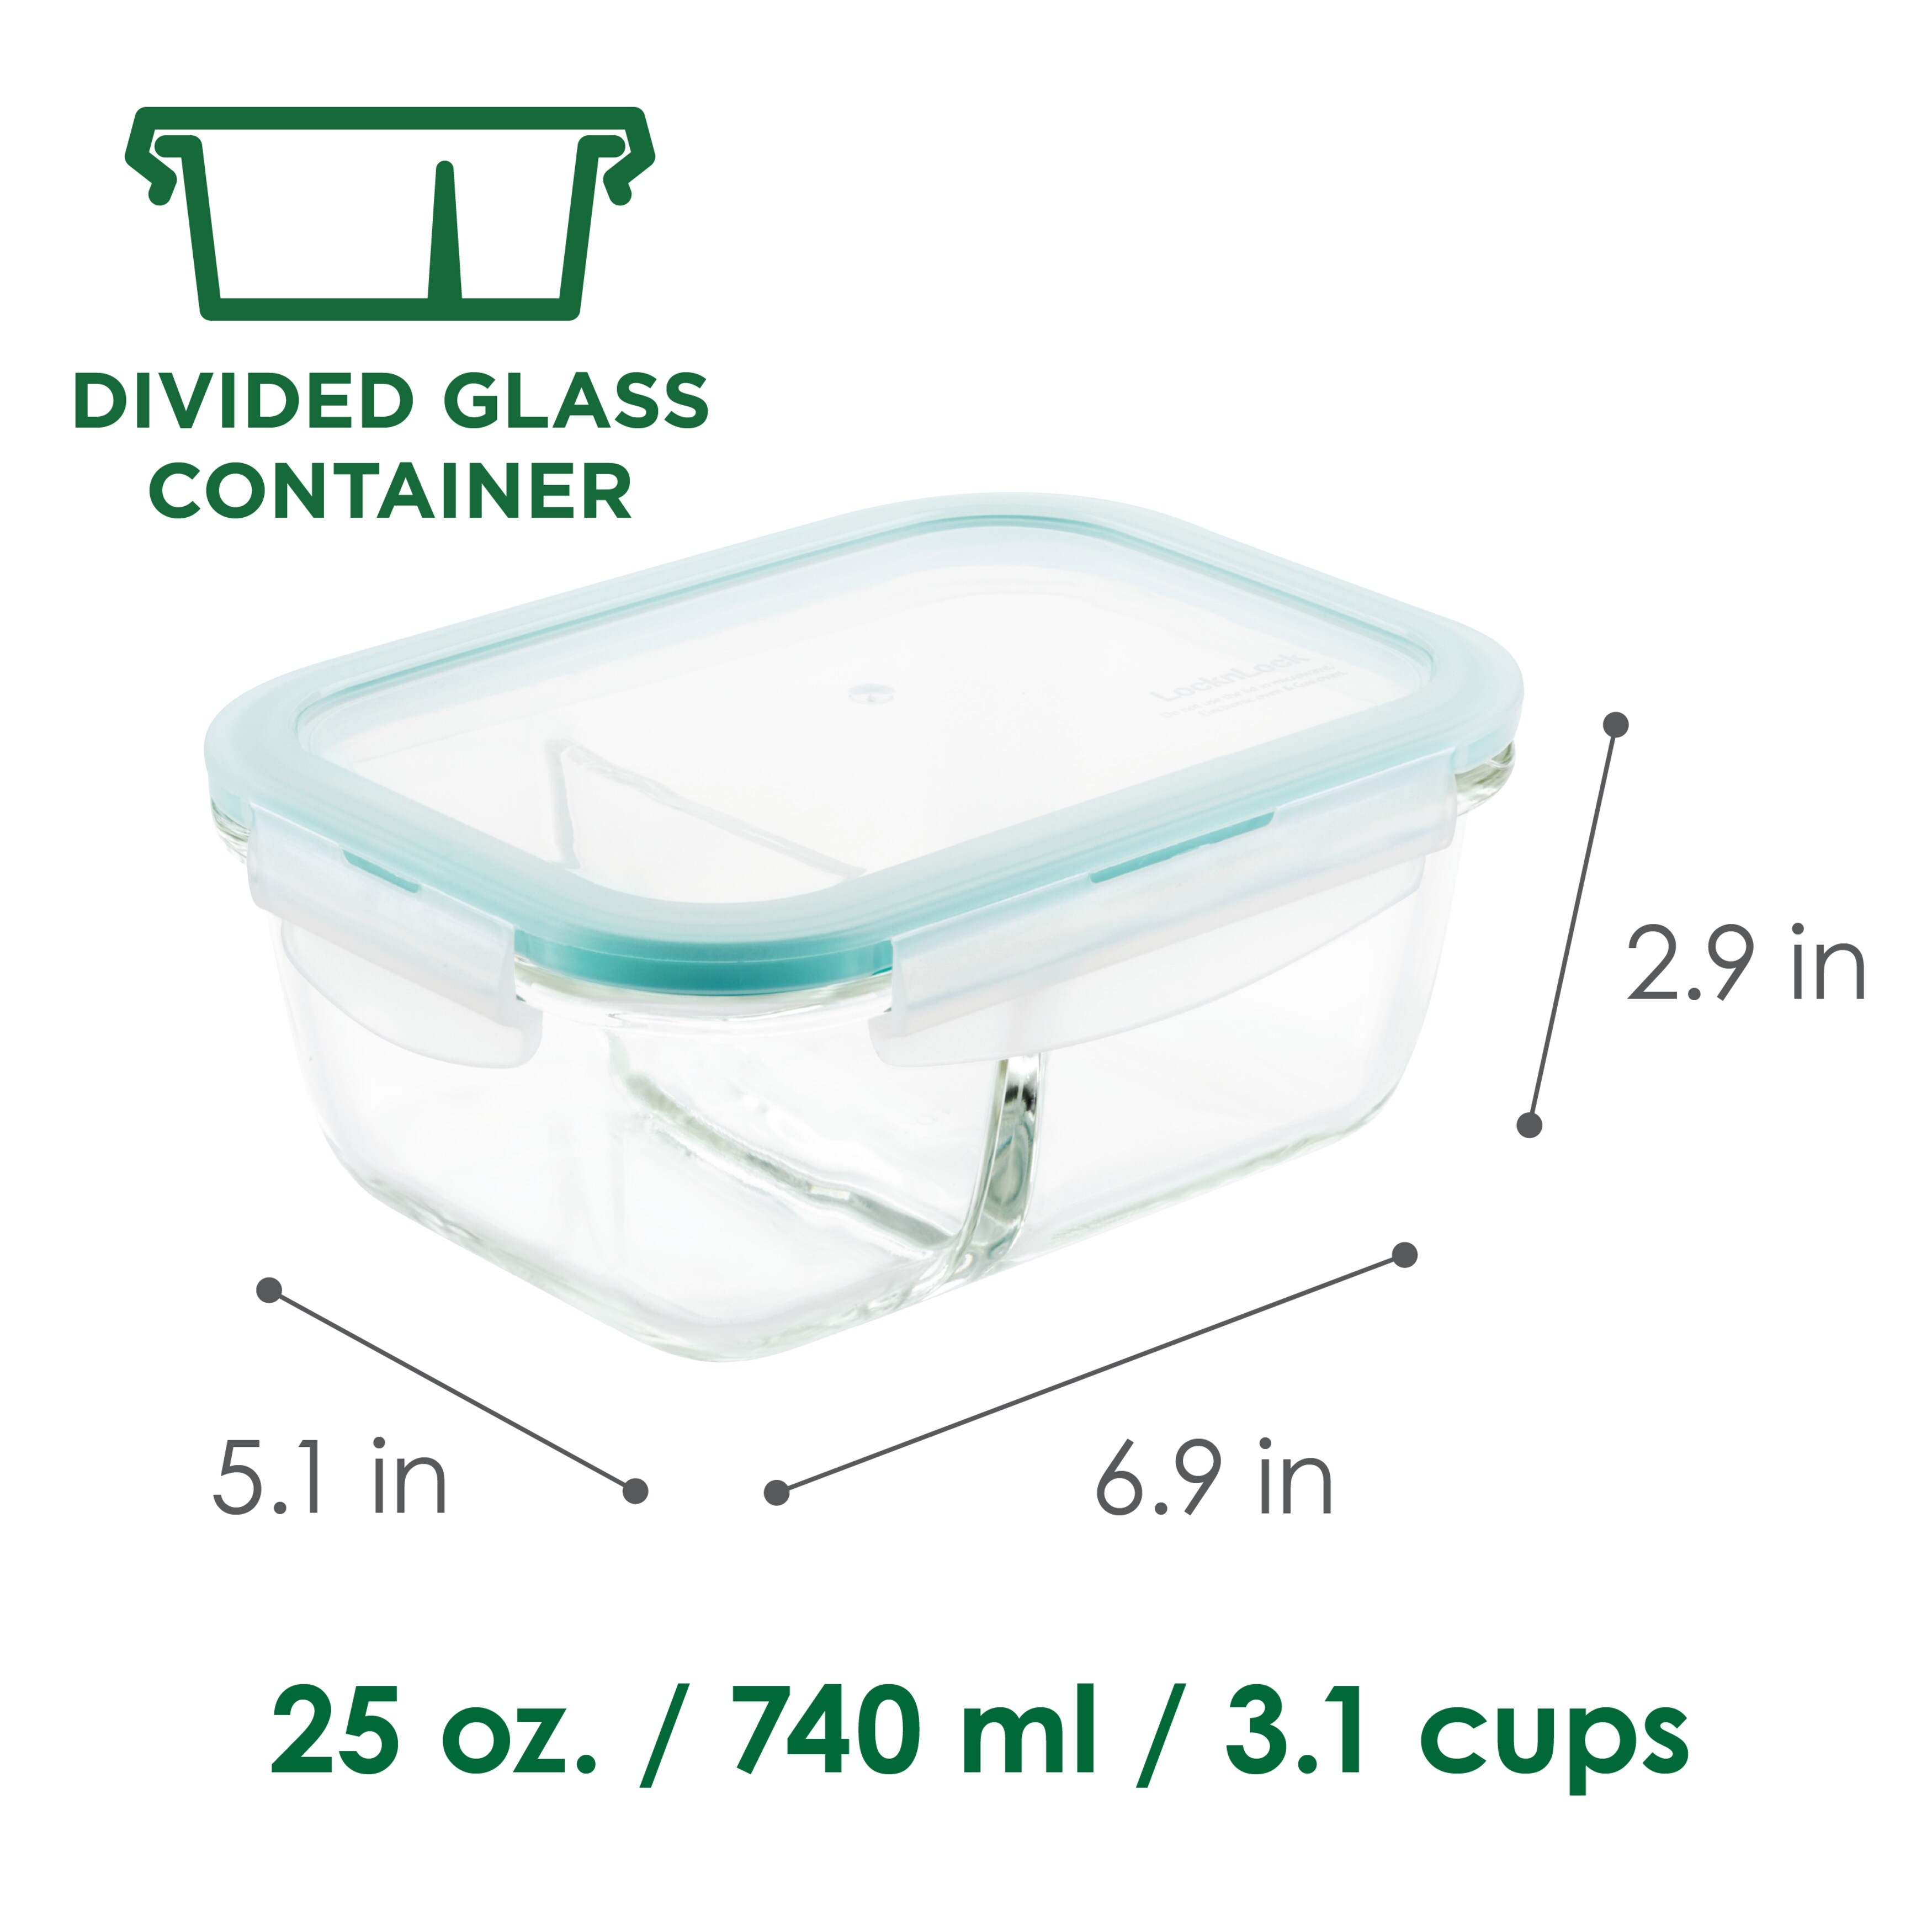 LOCK & LOCK Purely Better Glass Divided Rectangular Food Storage Container  32-Ounce LLG445C - The Home Depot